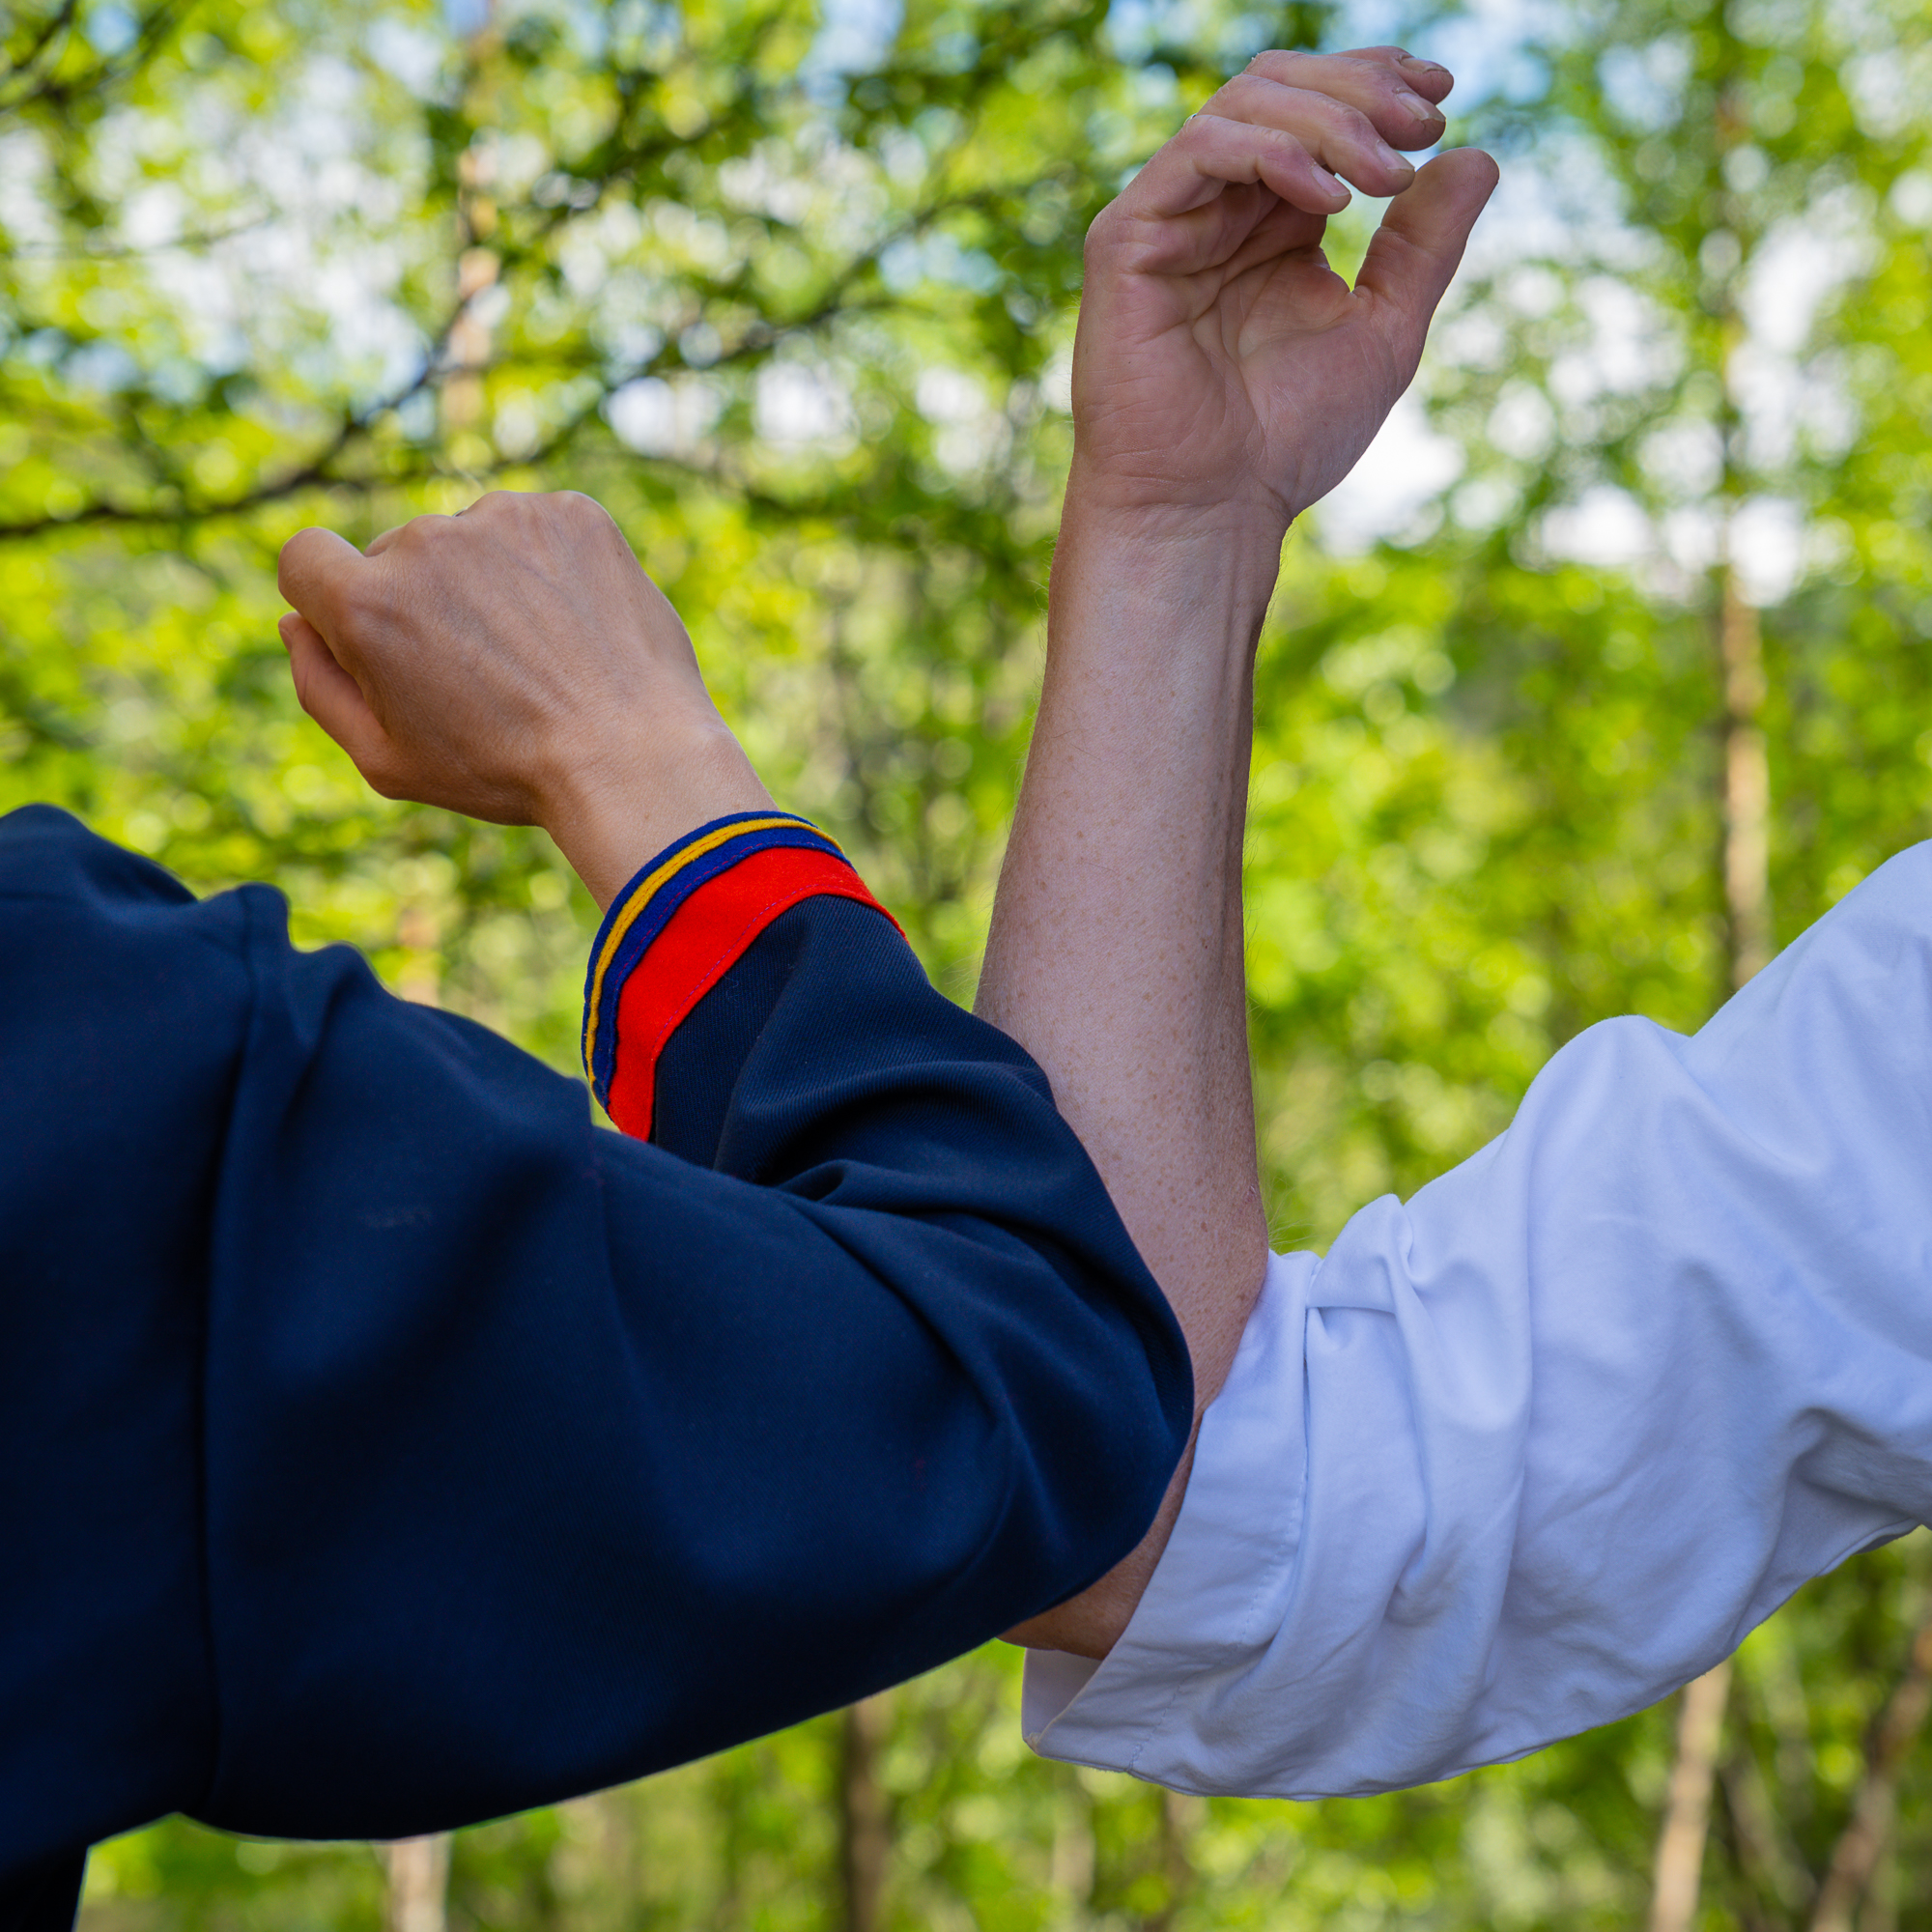 A person in Sami clothing doing an elbow greeting with a person in a labcoat